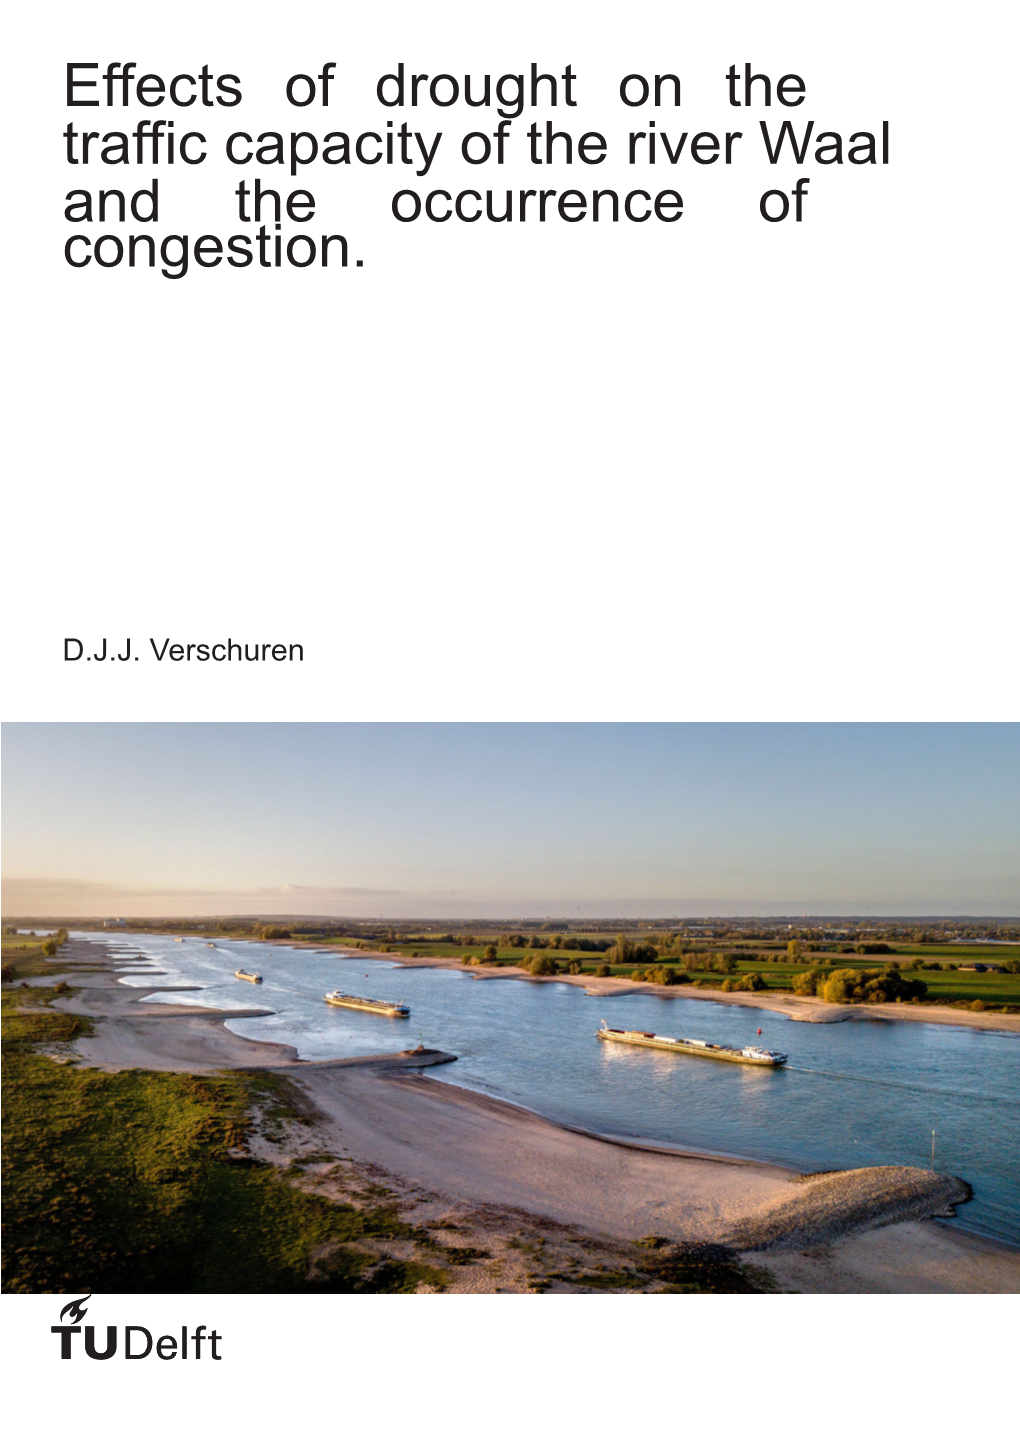 Effects of Drought on the Traffic Capacity of the River Waal and the Occurrence of Congestion